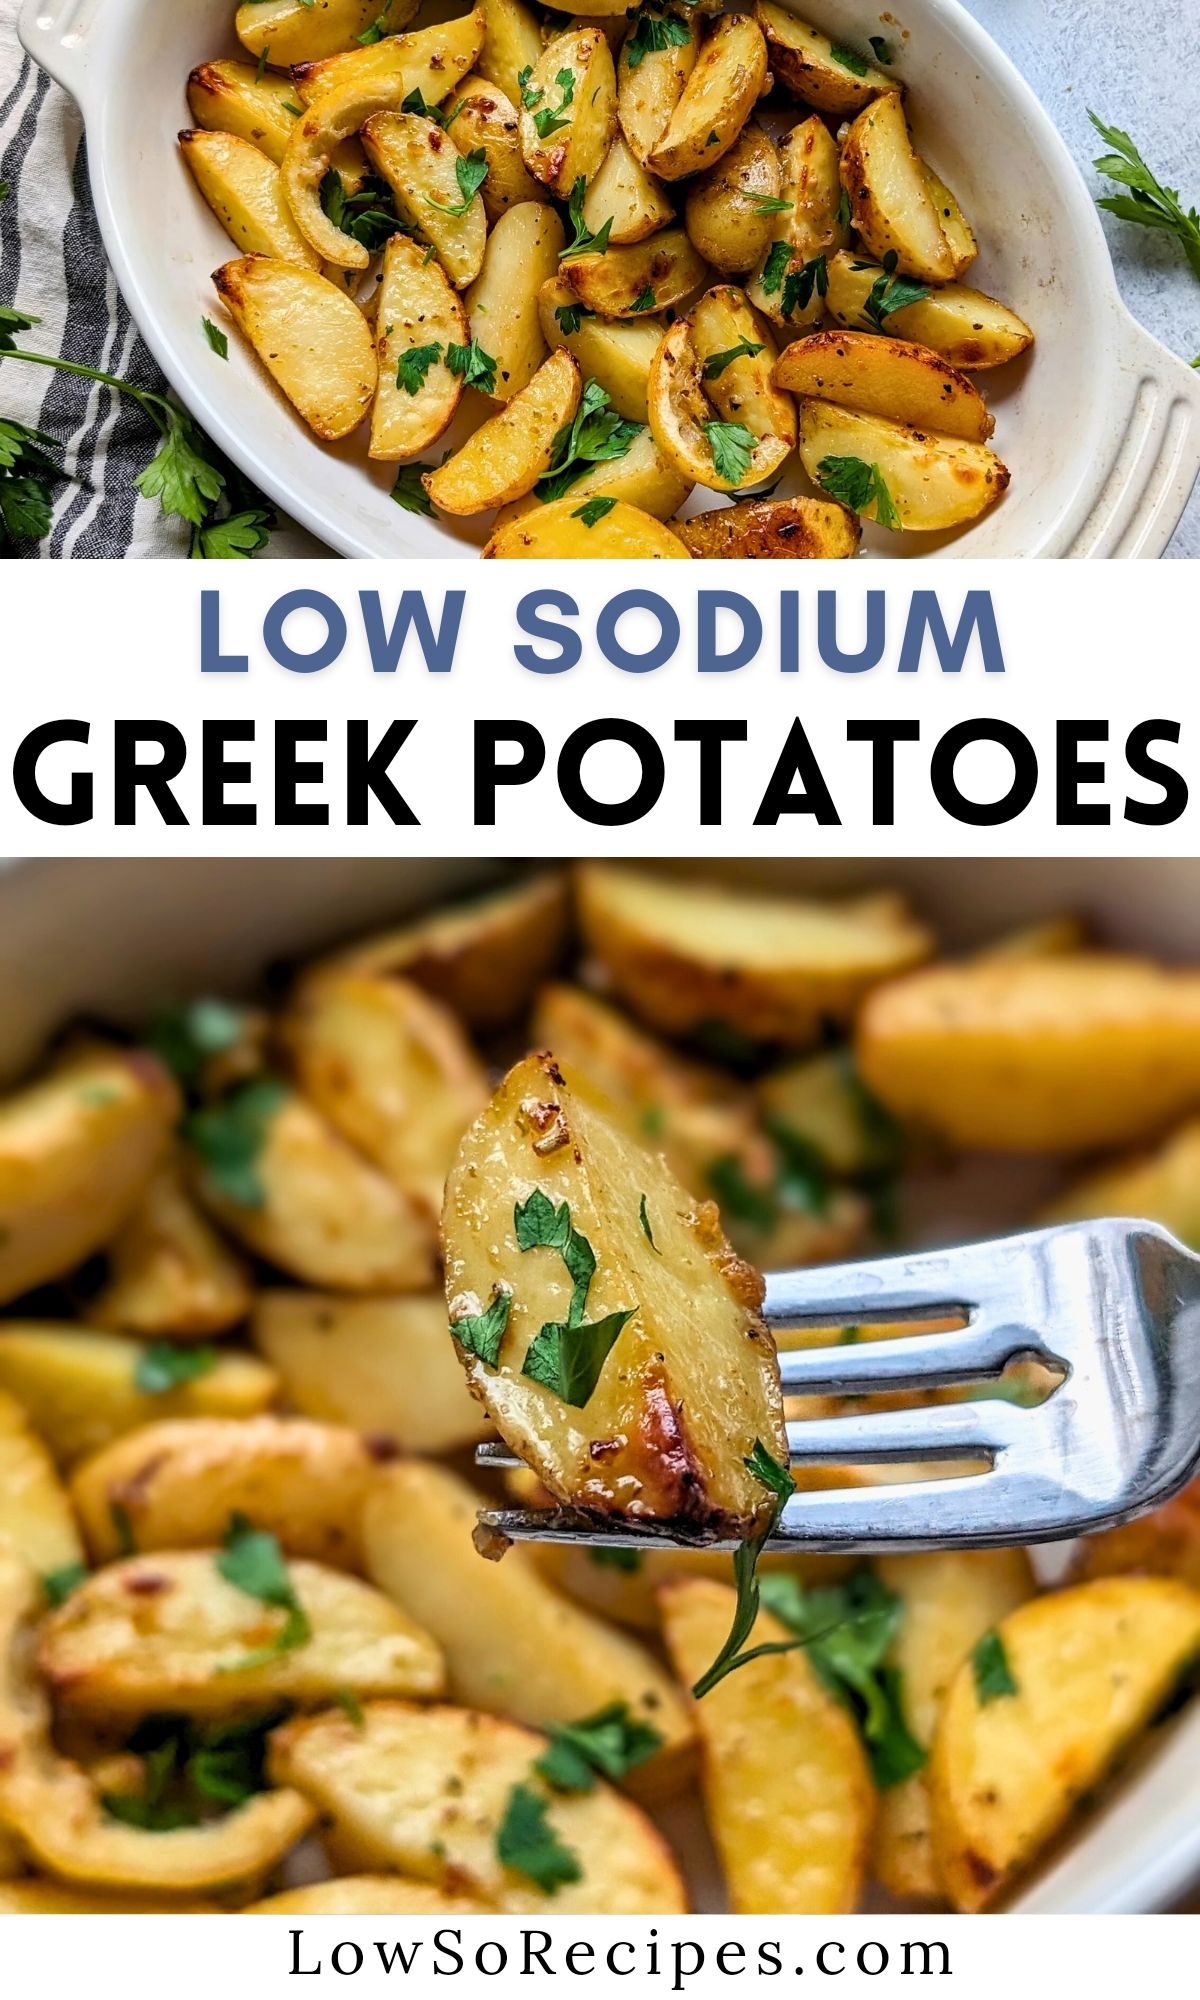 low sodium greek potatoes with lemon garlic and herbs no salt added potato recipes roasted in the oven